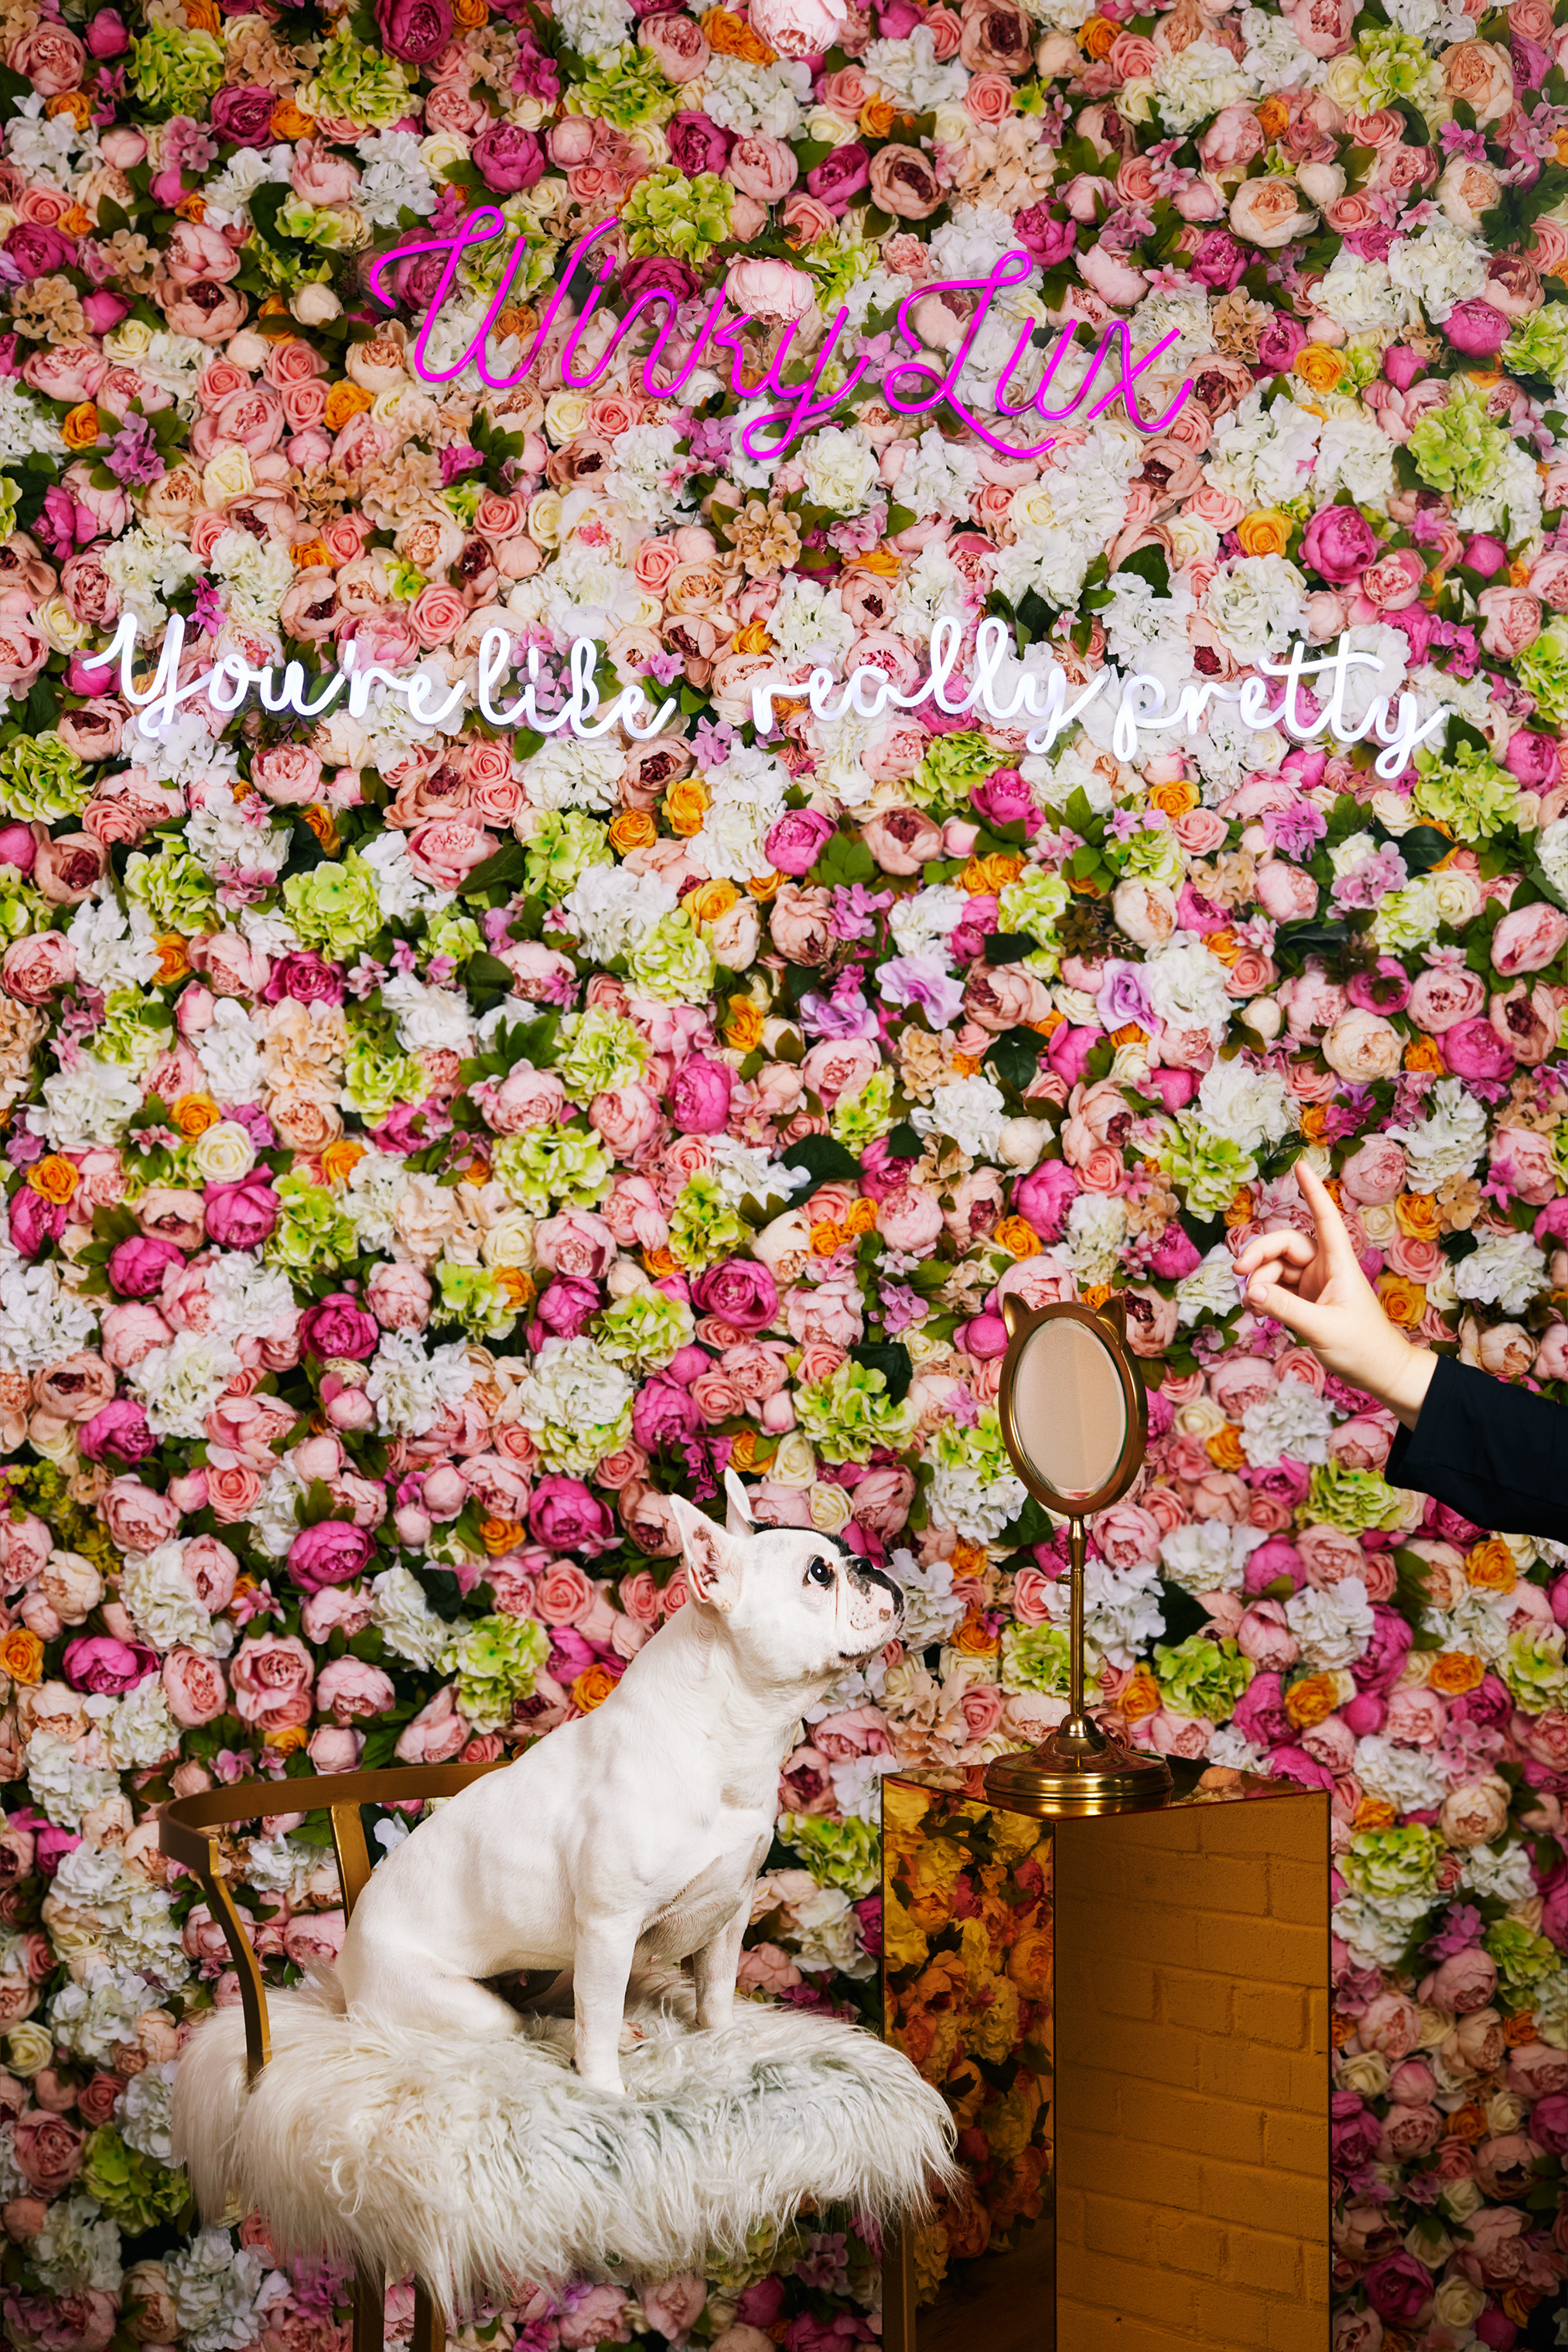 Pippy takes advantage of the social media-friendly backdrop at Winky Lux, posing under the sign, “You’re like really pretty.” (Kyoko Hamada for TIME)